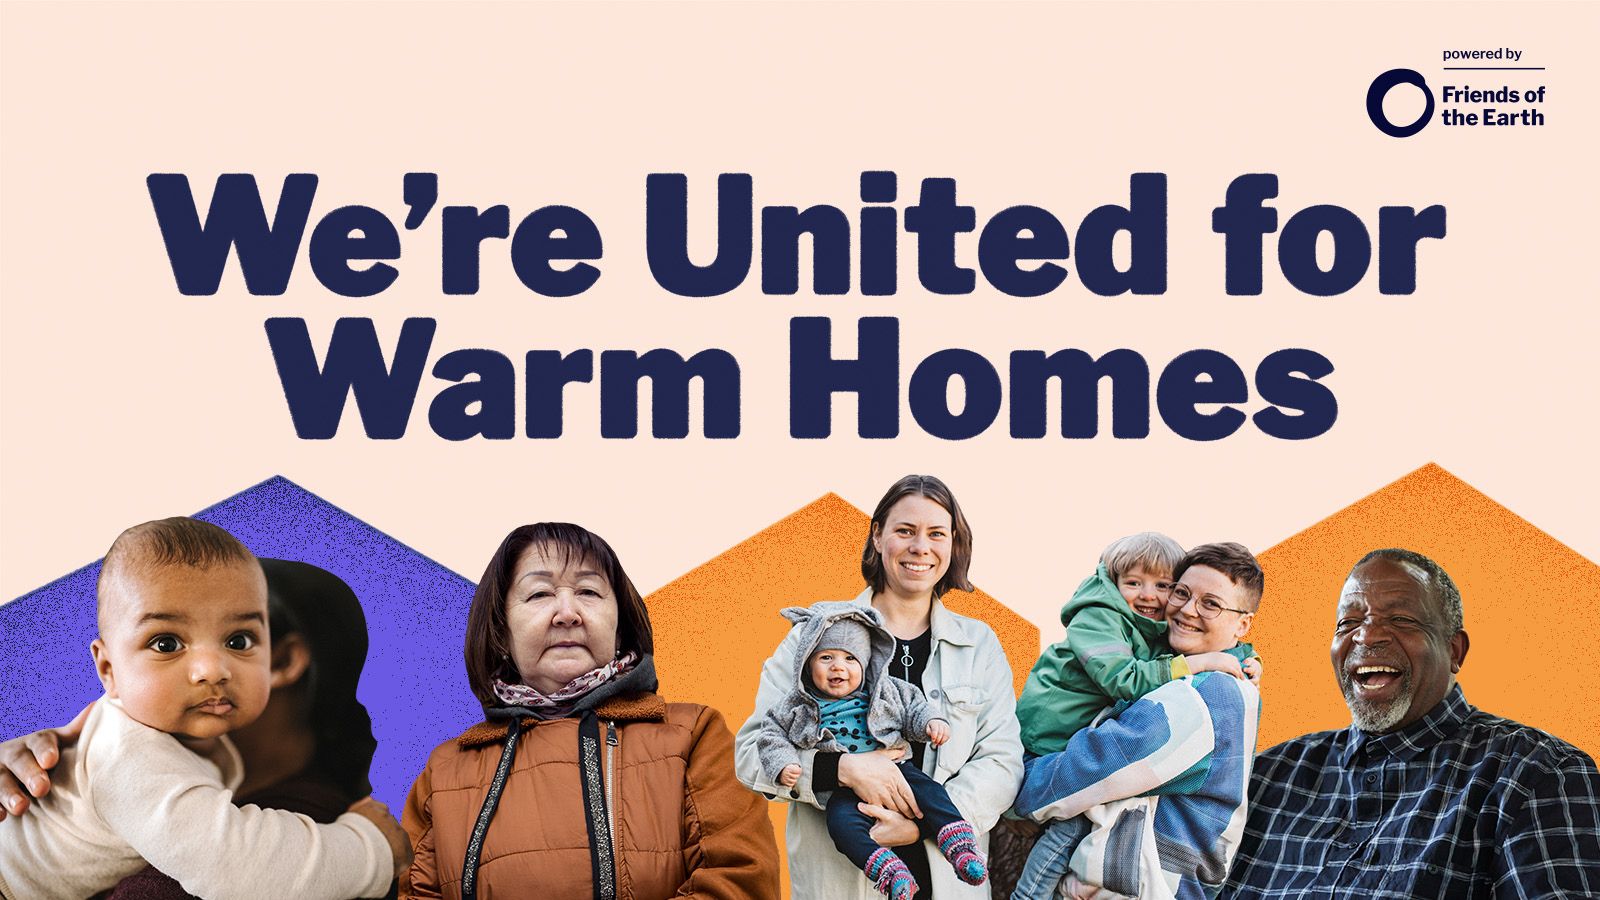 Can we Unite for Warm Homes?